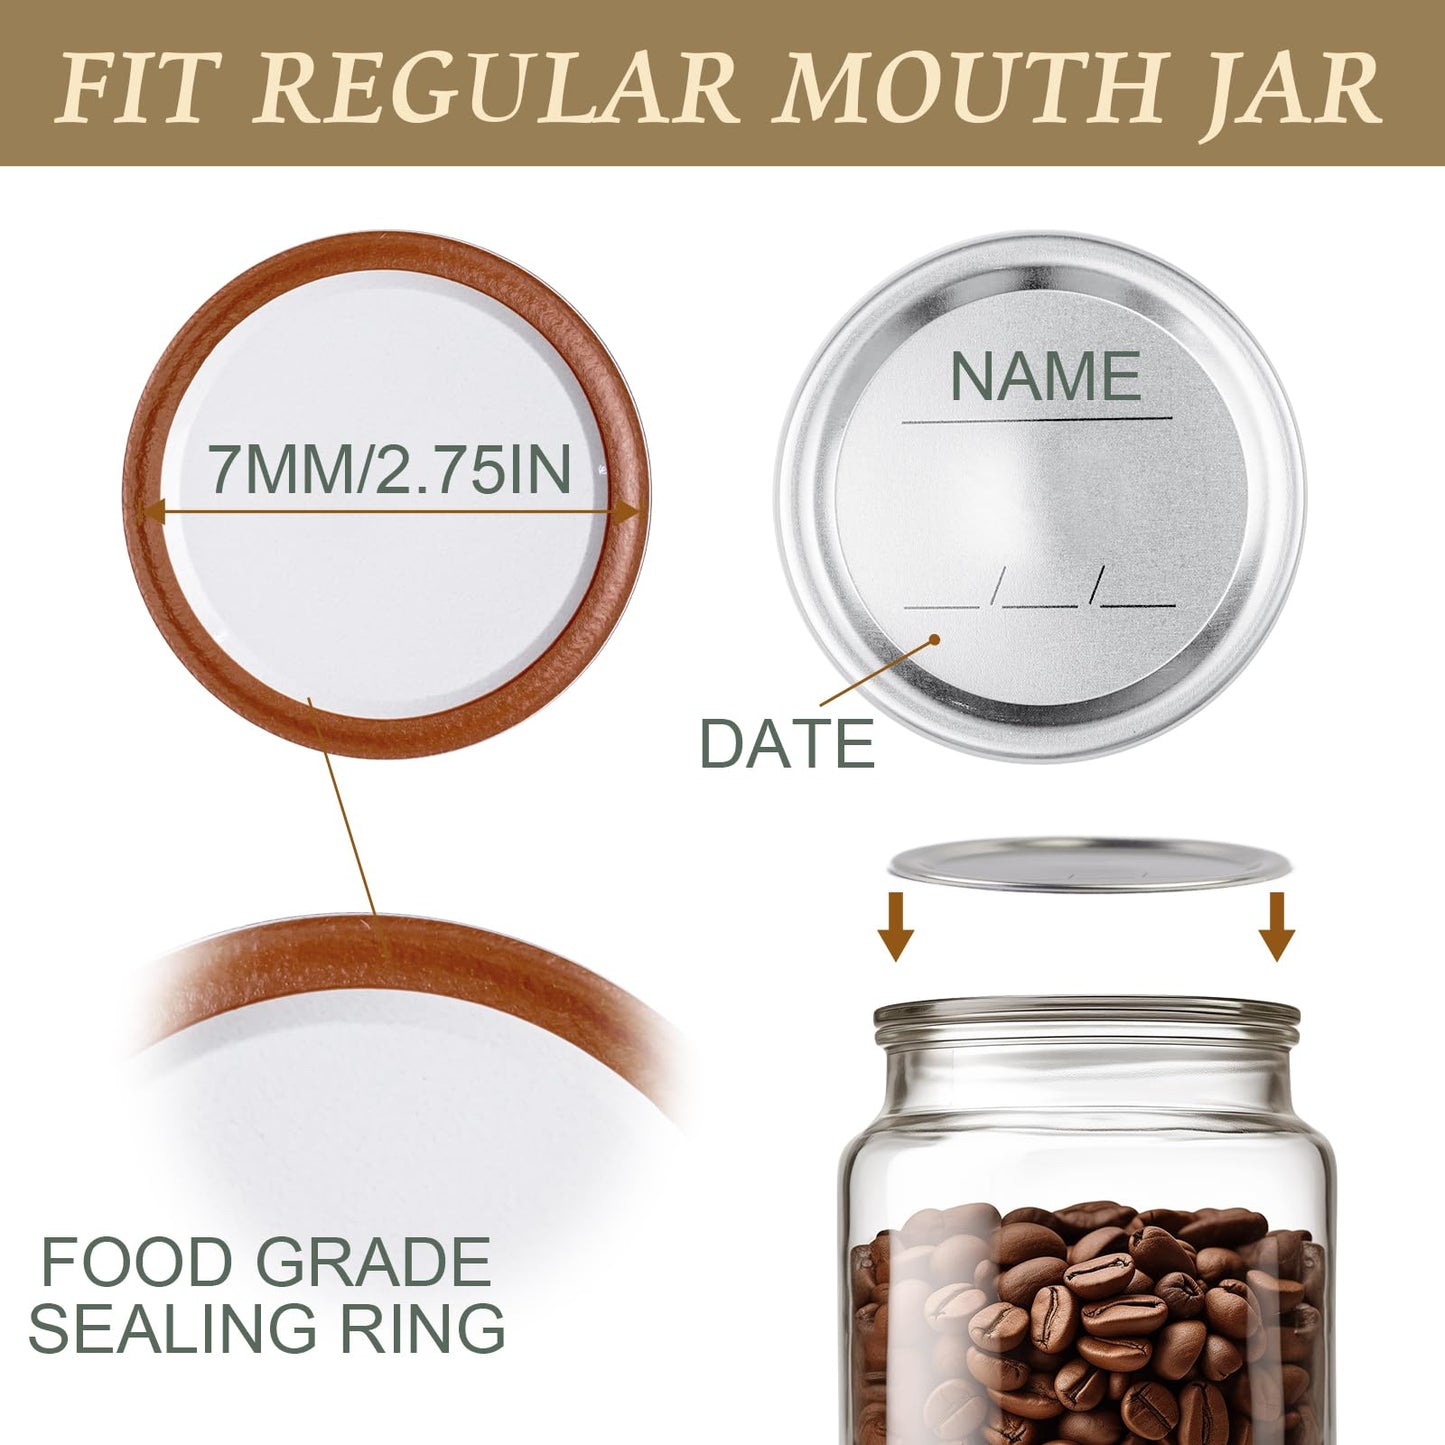 200 PCS Canning Lids Regular Mouth,2.76in Mouth Mason Jar Lids,Ball Kerr Jar with Lids with Leak proof Airtight Seal Rust Proof Split,Regular Mouth Kerr Mason Jars Food Grade,Canning Food DIY